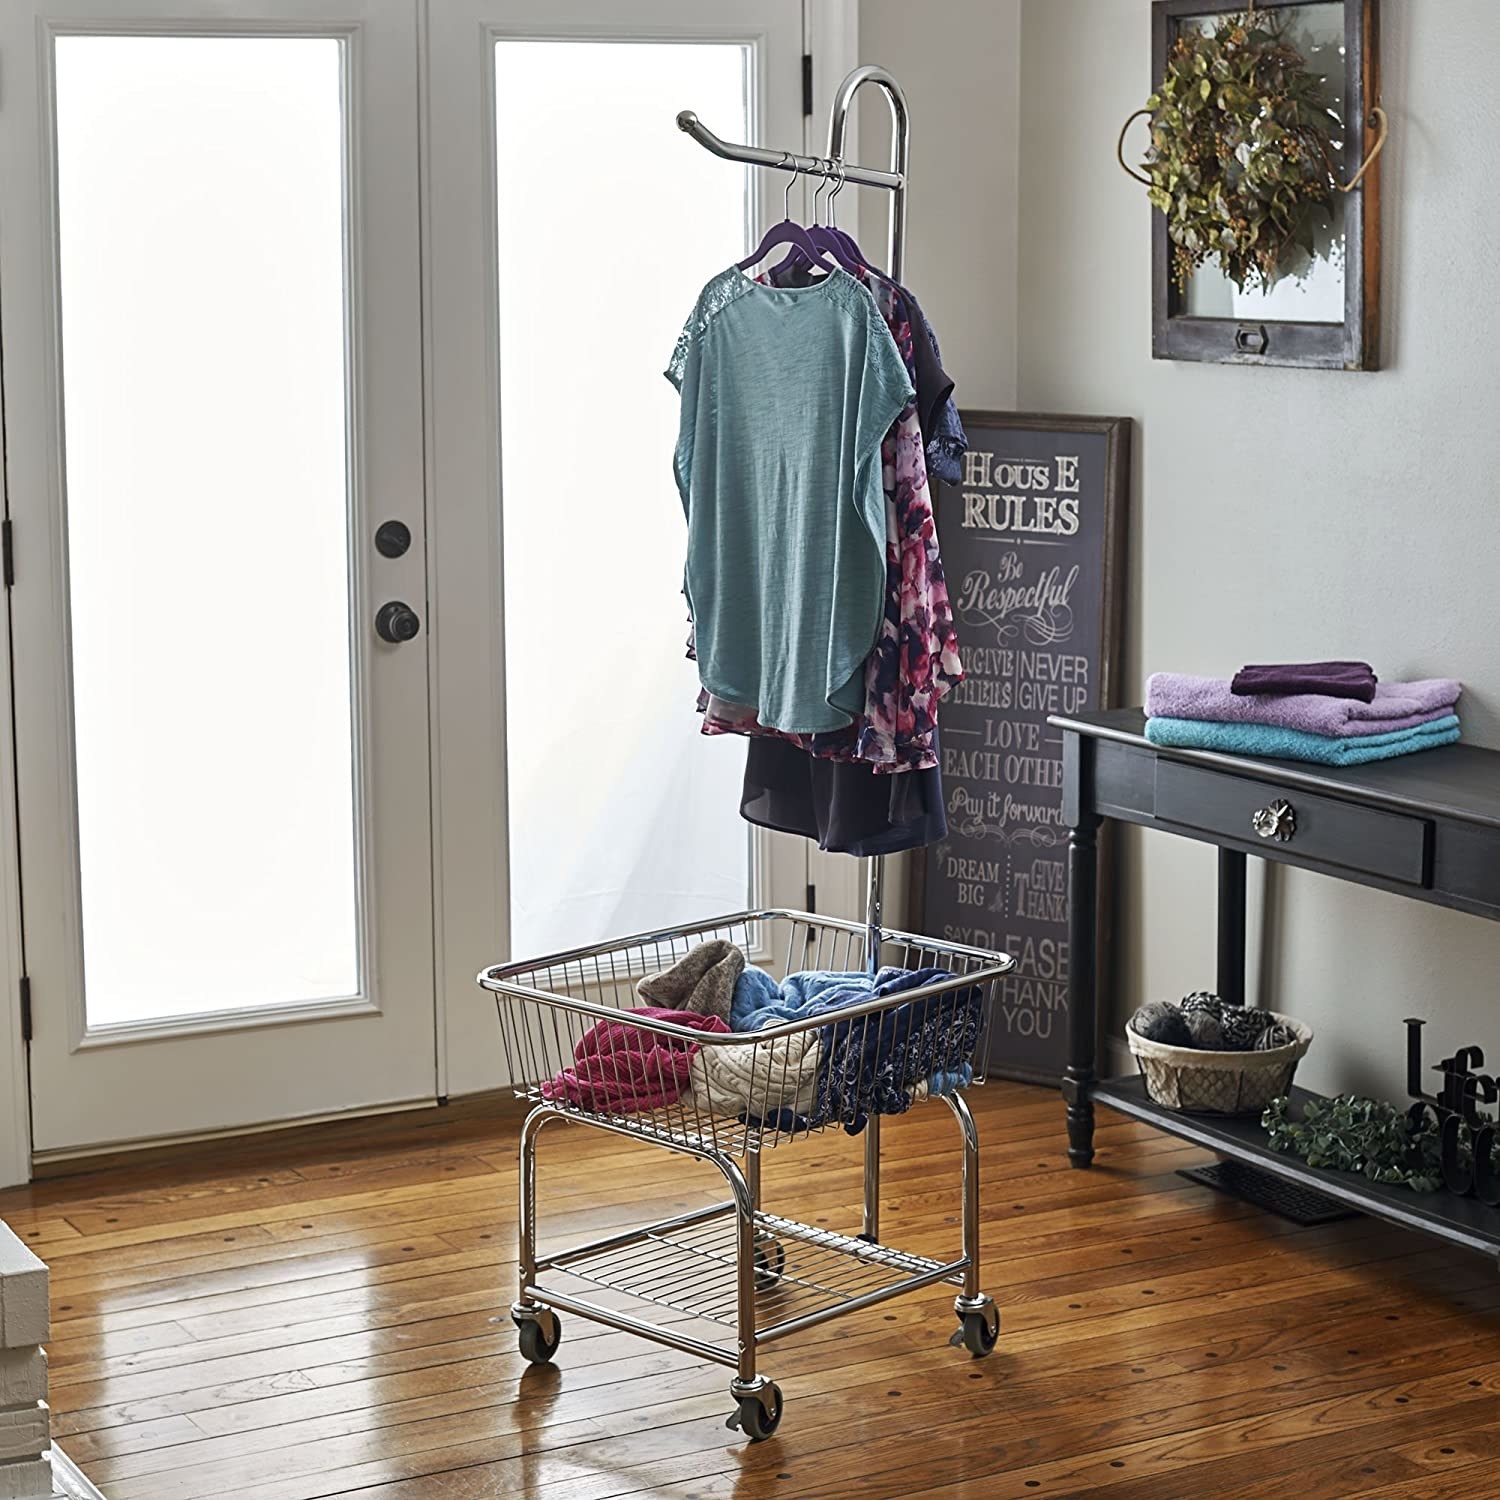 A small square laundry basket with wheels It has a tall hanging rack above it